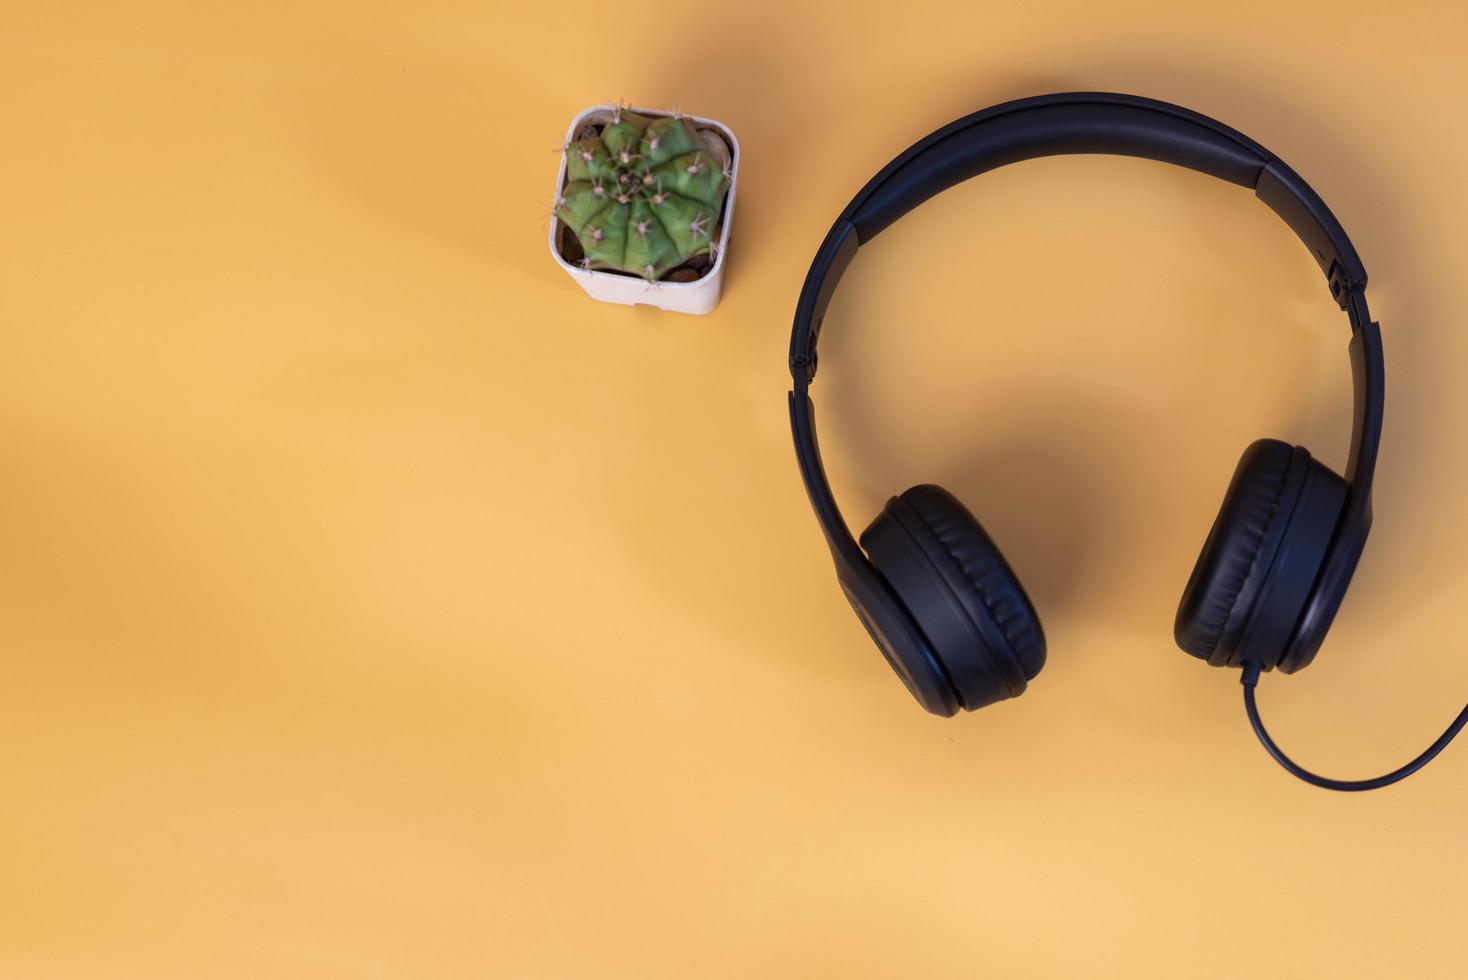 earphones and cactus on yellow background copy space. photo